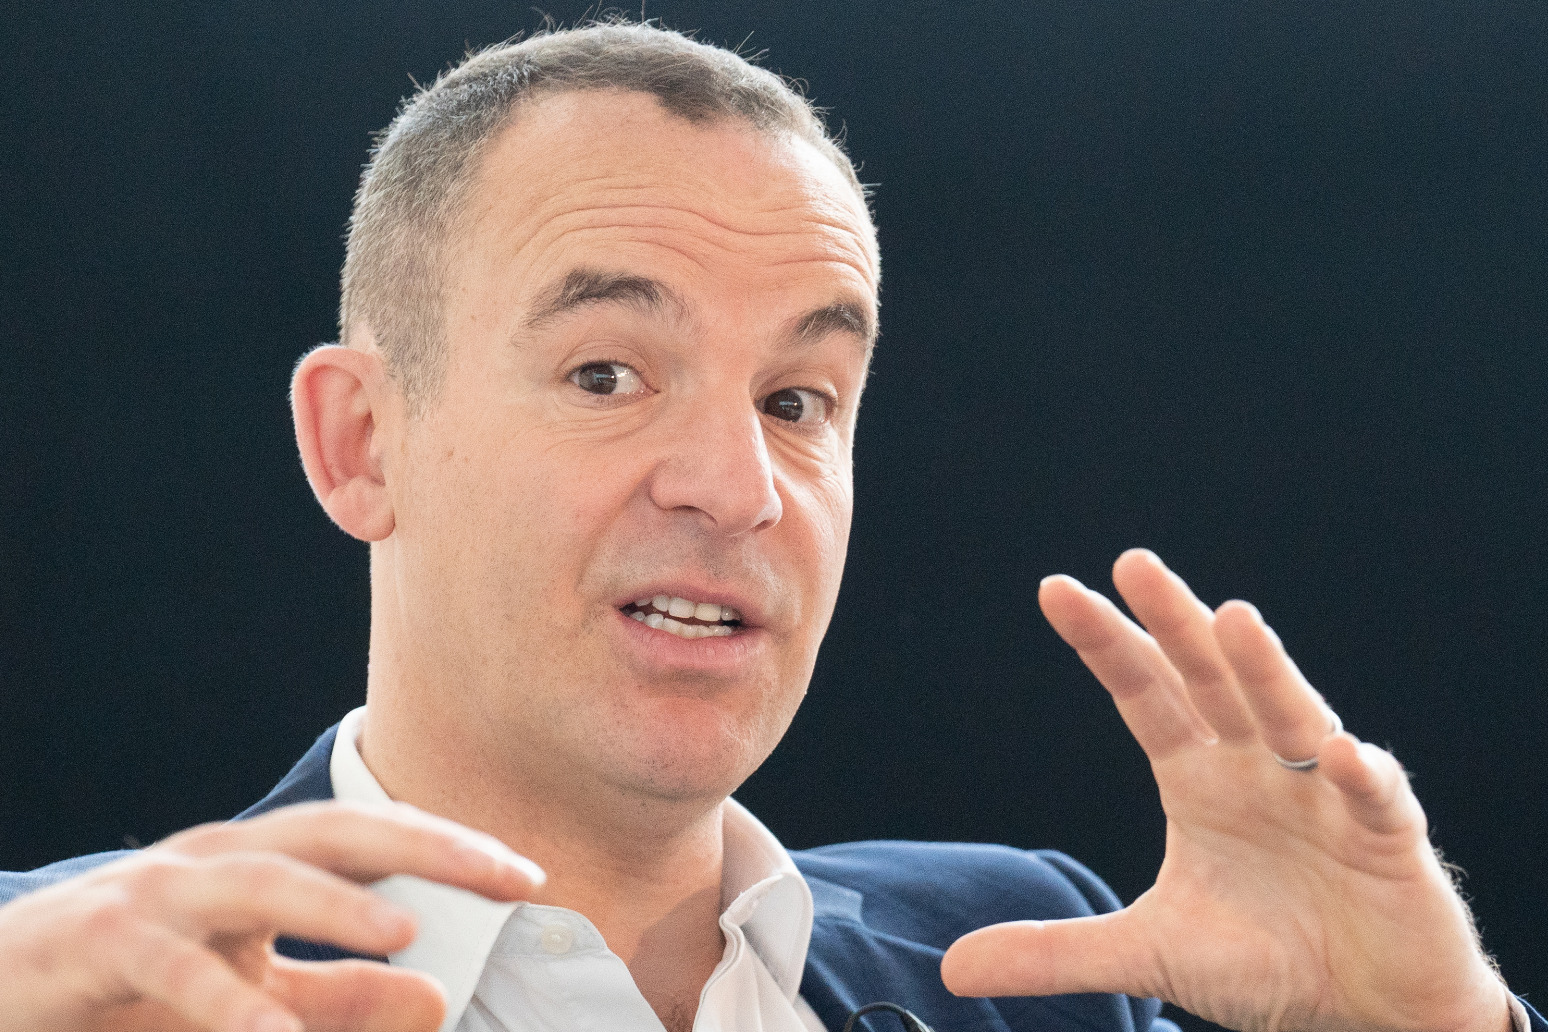 Martin Lewis joins calls for Government to urgently halt energy bills increase 